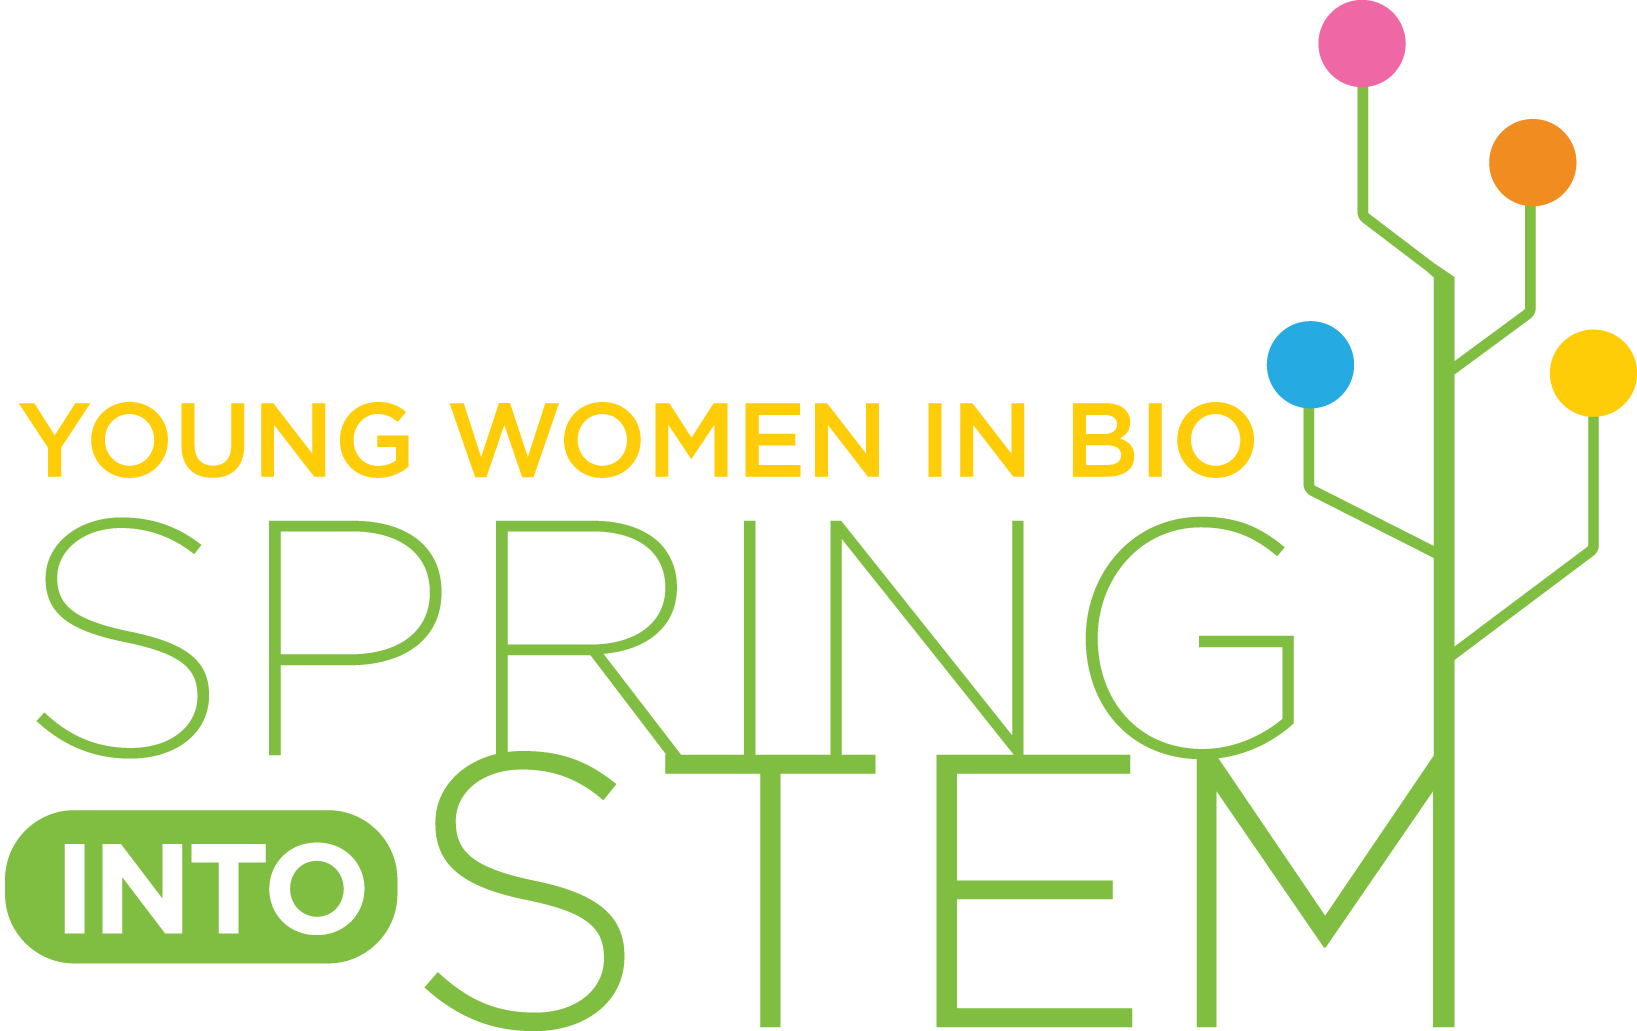 From April 1 through early June, YWIB invites girls from elementary school through college to Spring Into STEM: a series of live online webinars and virtual panel discussions, giving young girls a chance to explore educational and career opportunities in science, technology, engineering and math (STEM)